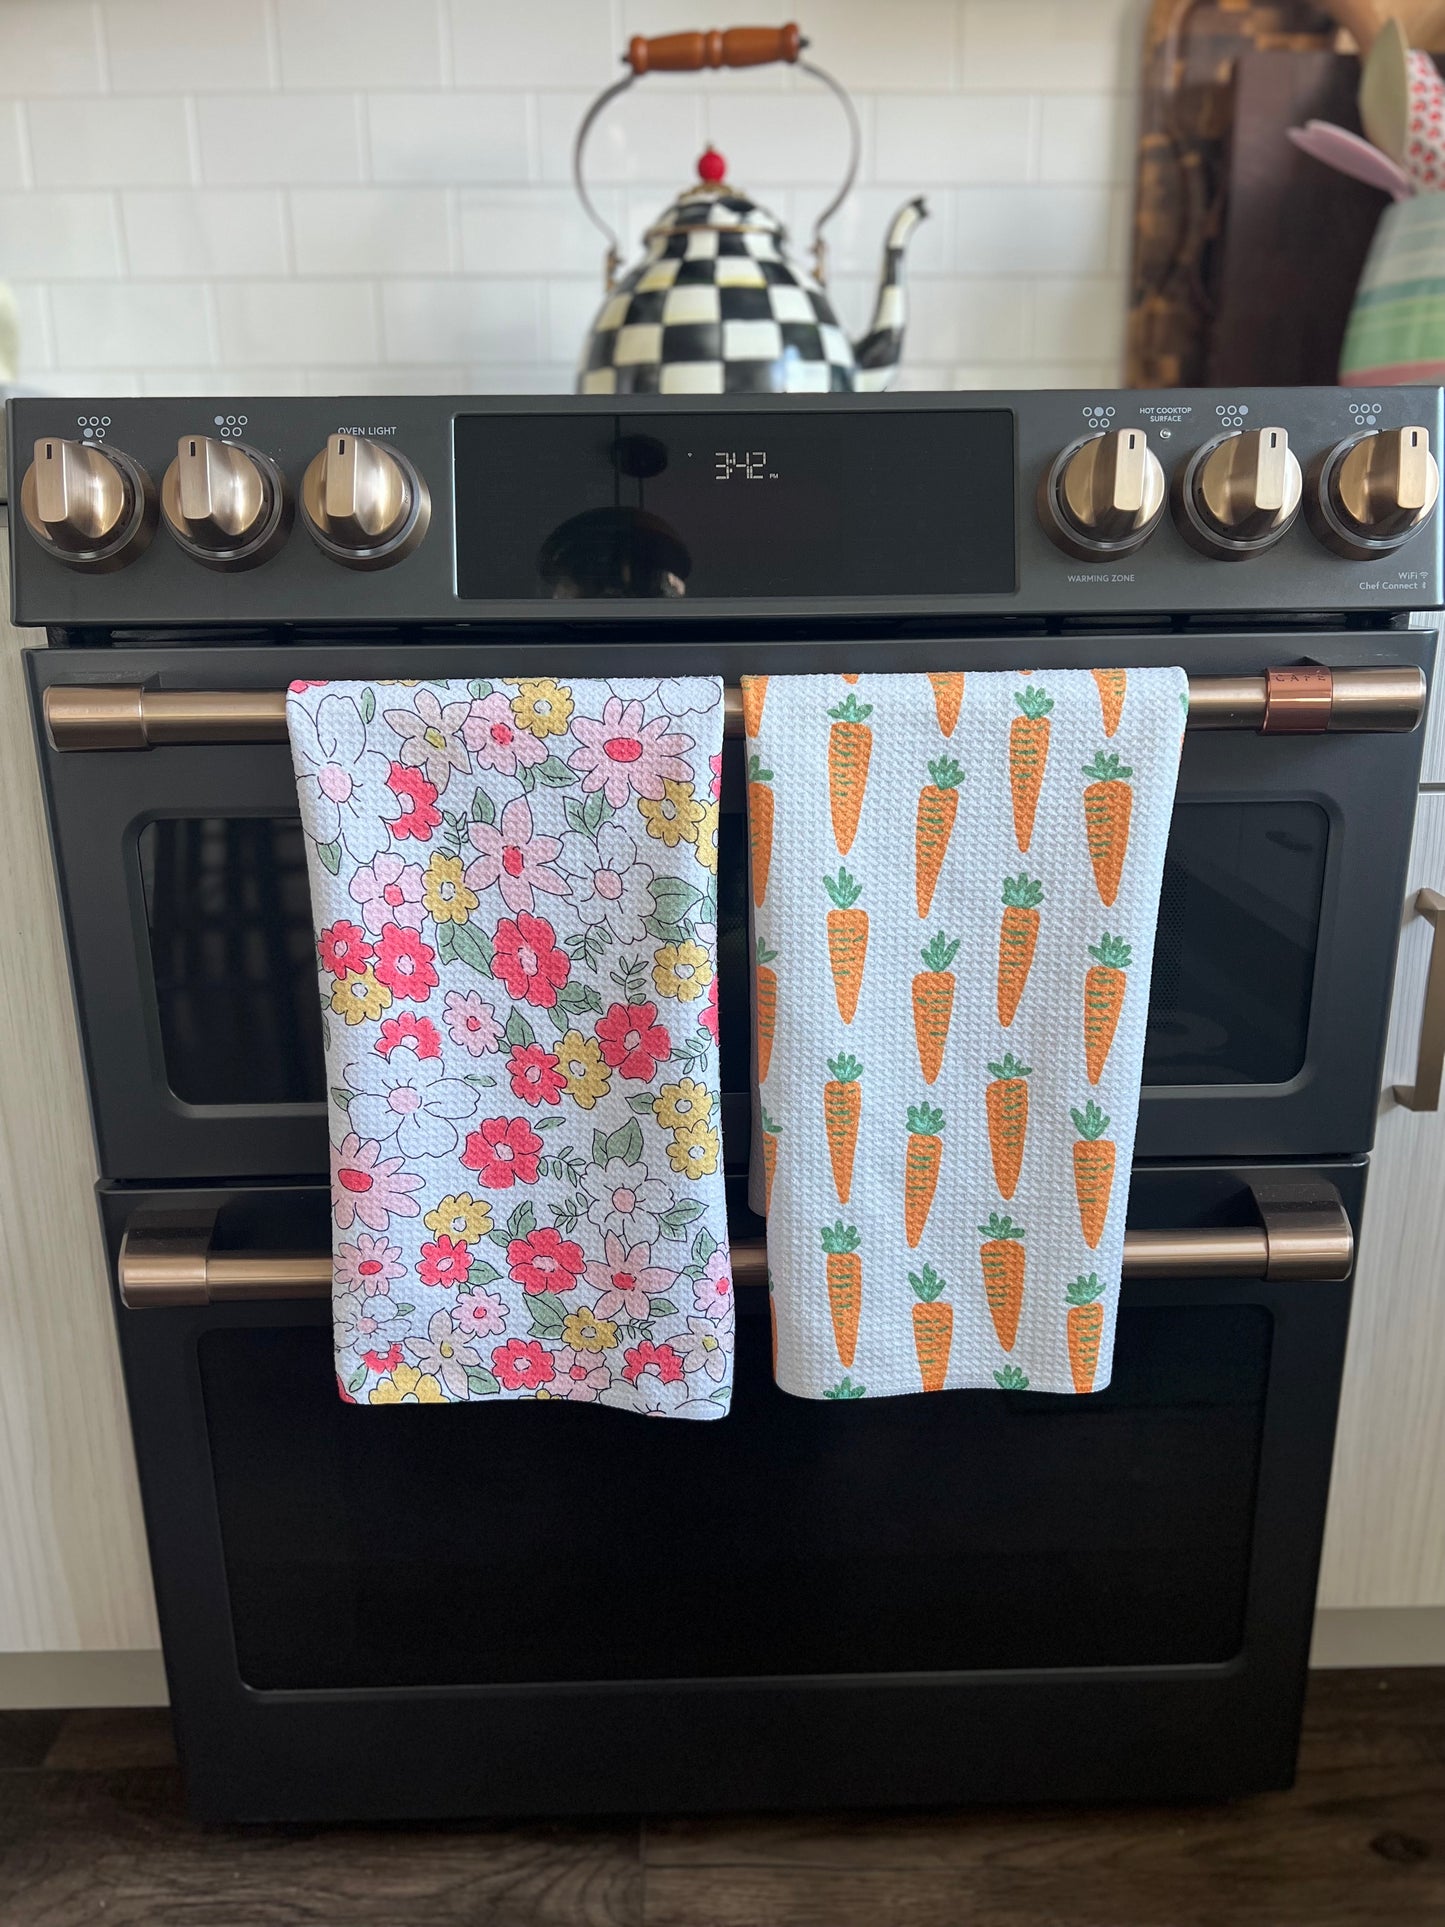 Ring around the Posies: Single-Sided Hand Towel